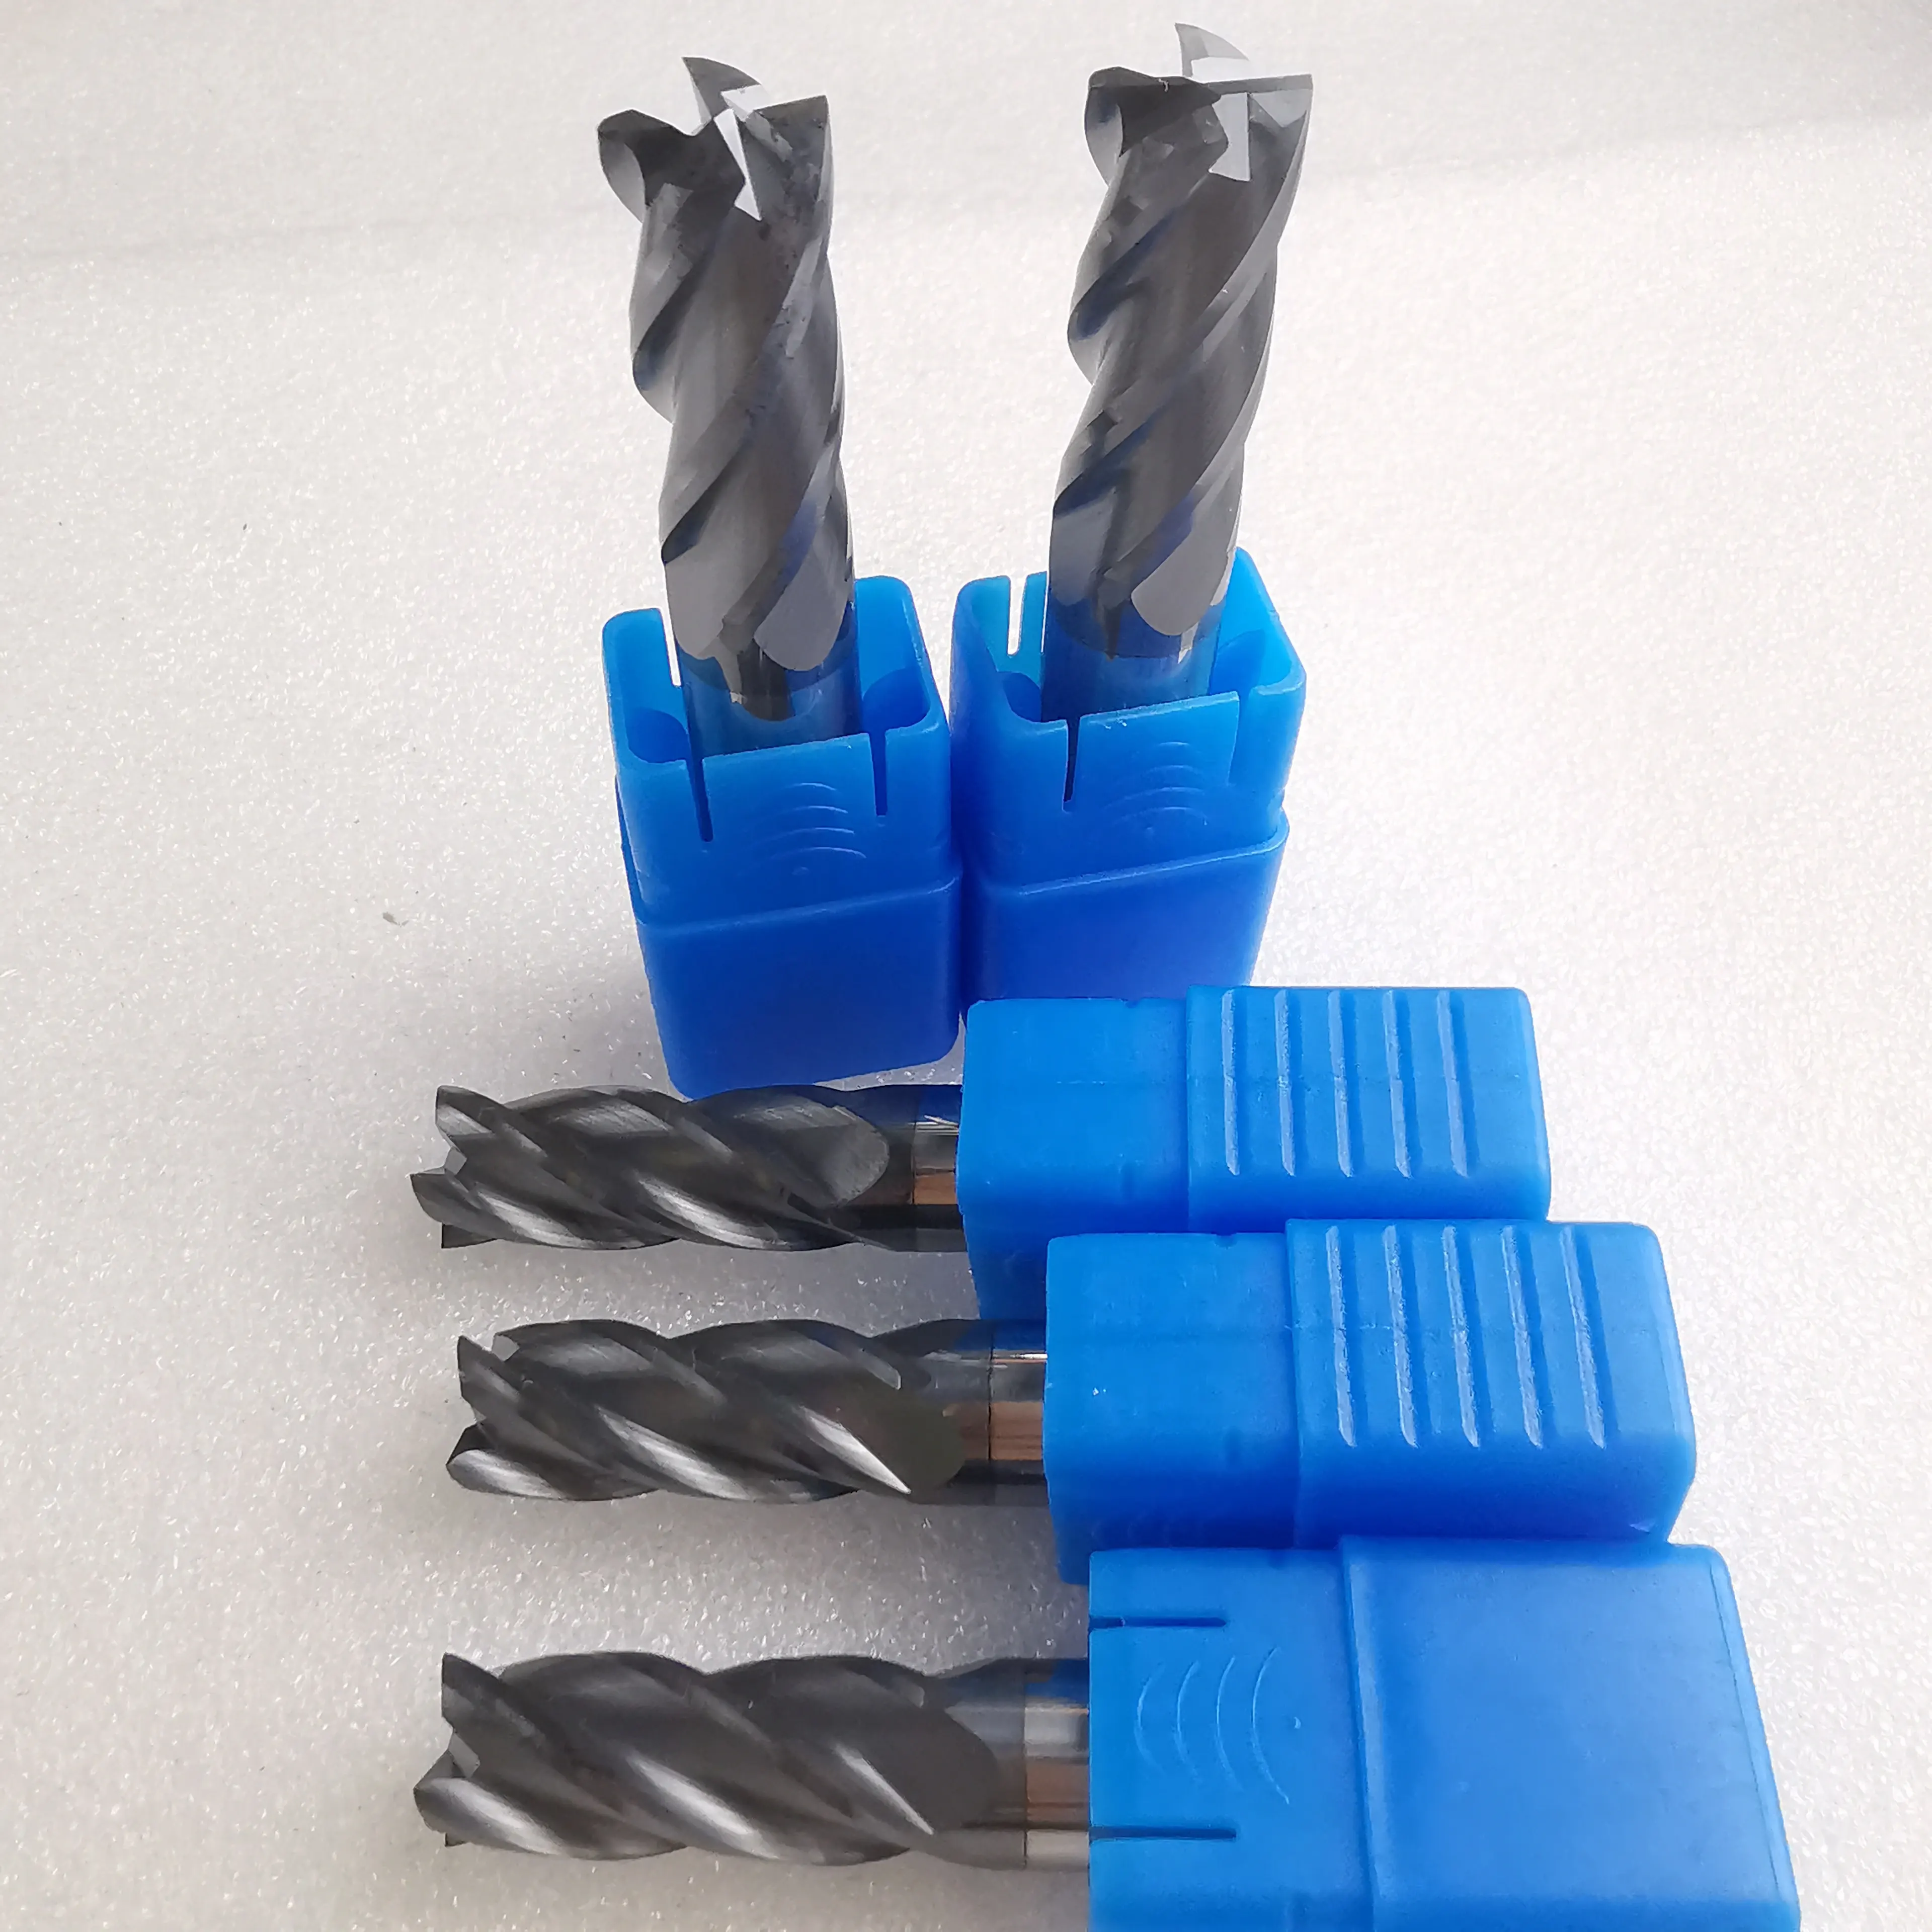 45/55 de gree milling cutters with 4-edge tungsten flat cutters, CNC numerical control tools /HSS